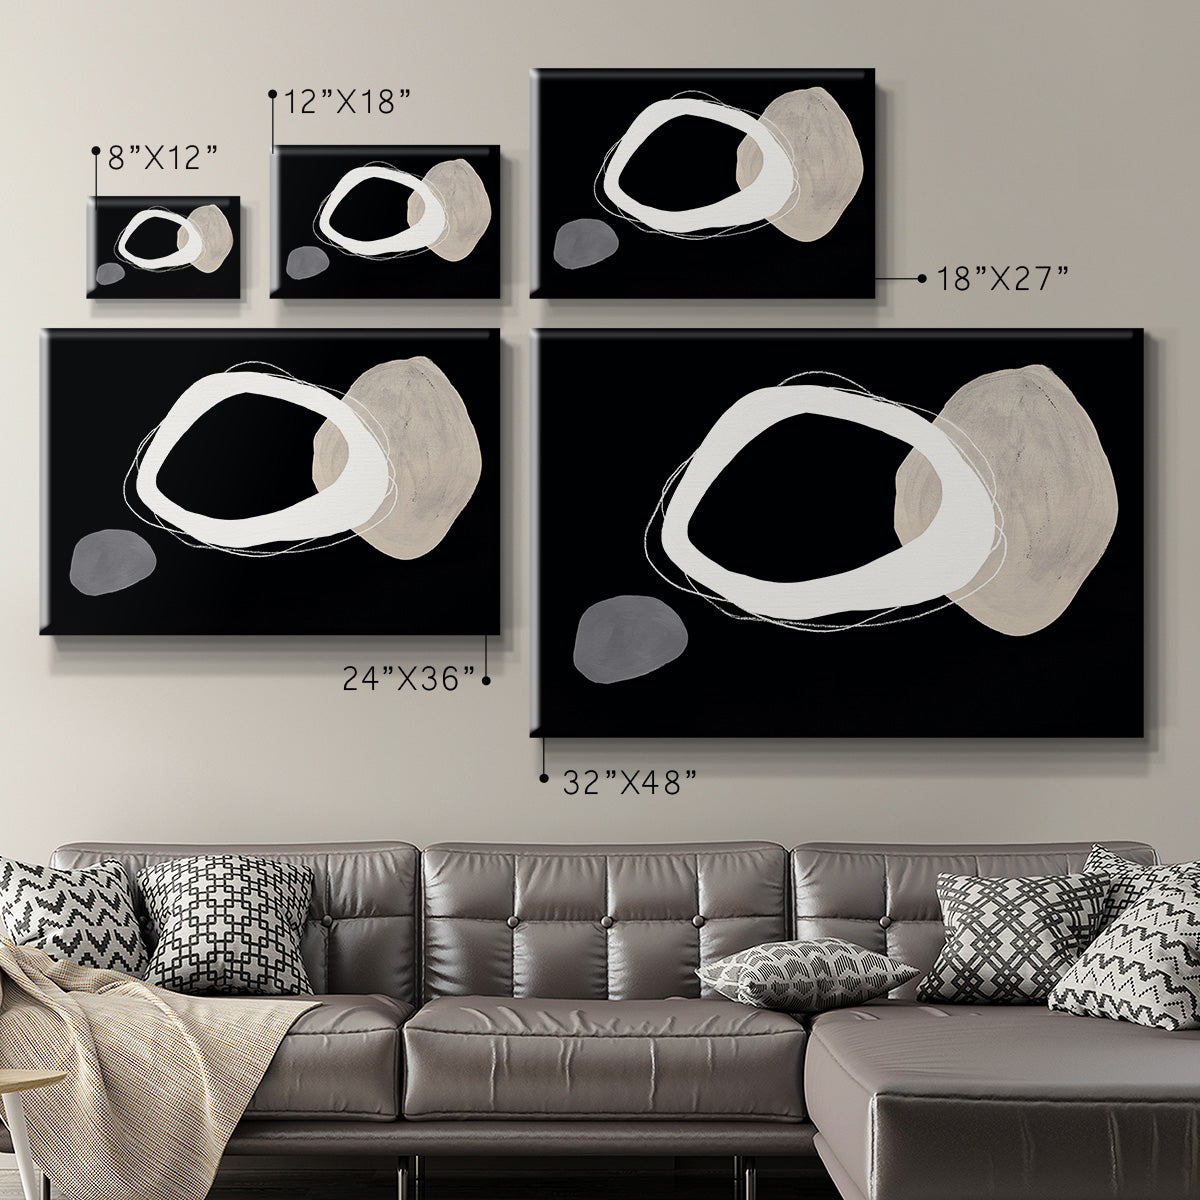 Simply Stated I Premium Gallery Wrapped Canvas - Ready to Hang